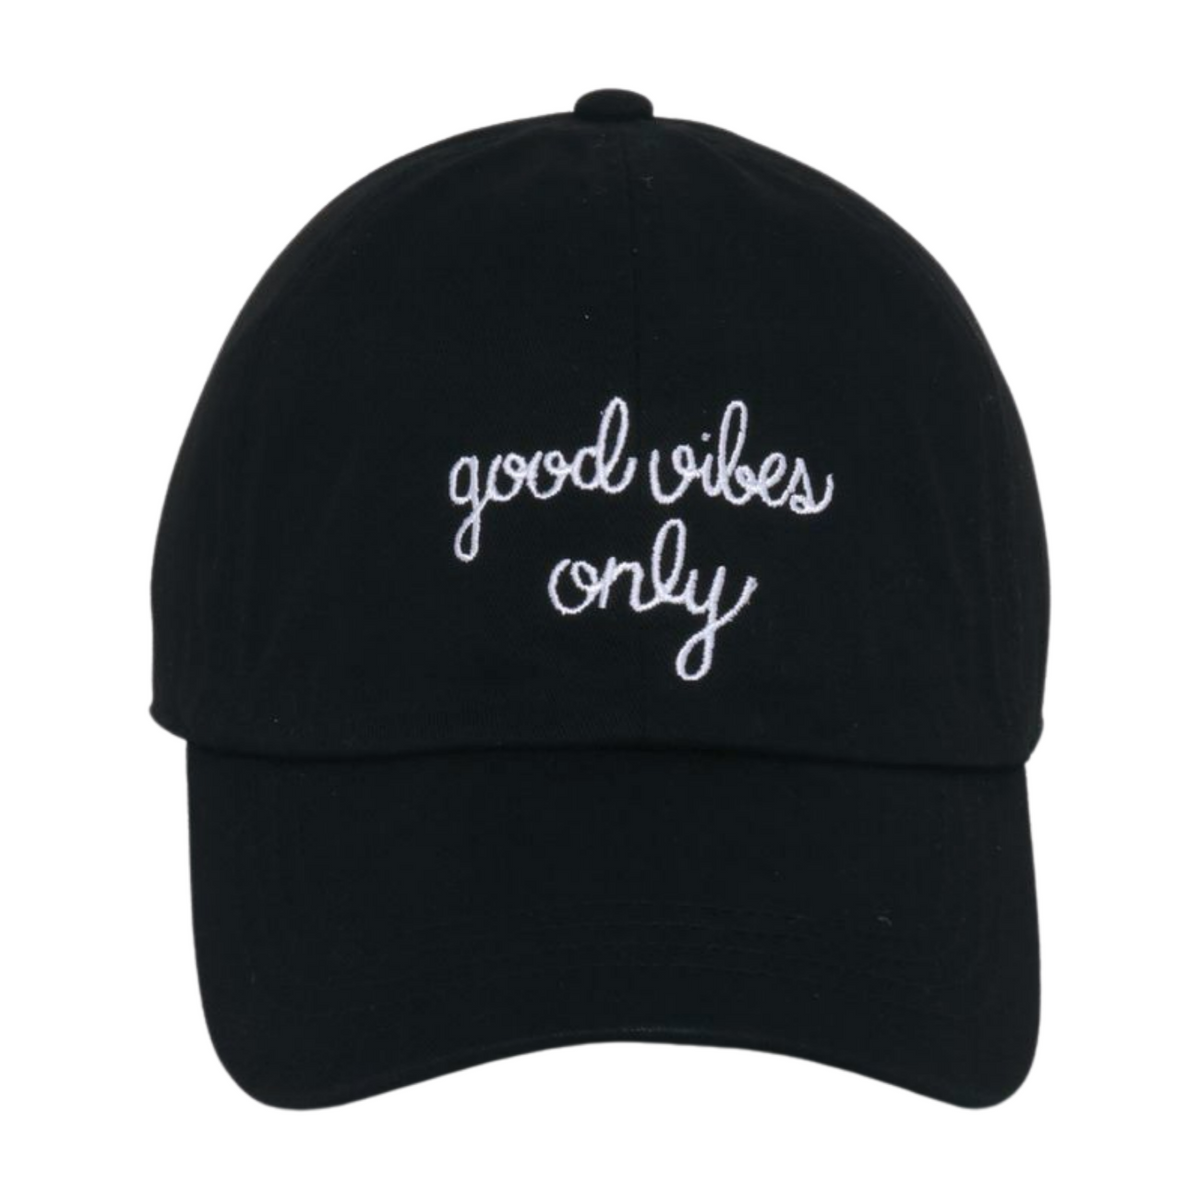 LCAP3477 - "GOOD VIBES ONLY" EMBROIDERED BASEBALL CAP